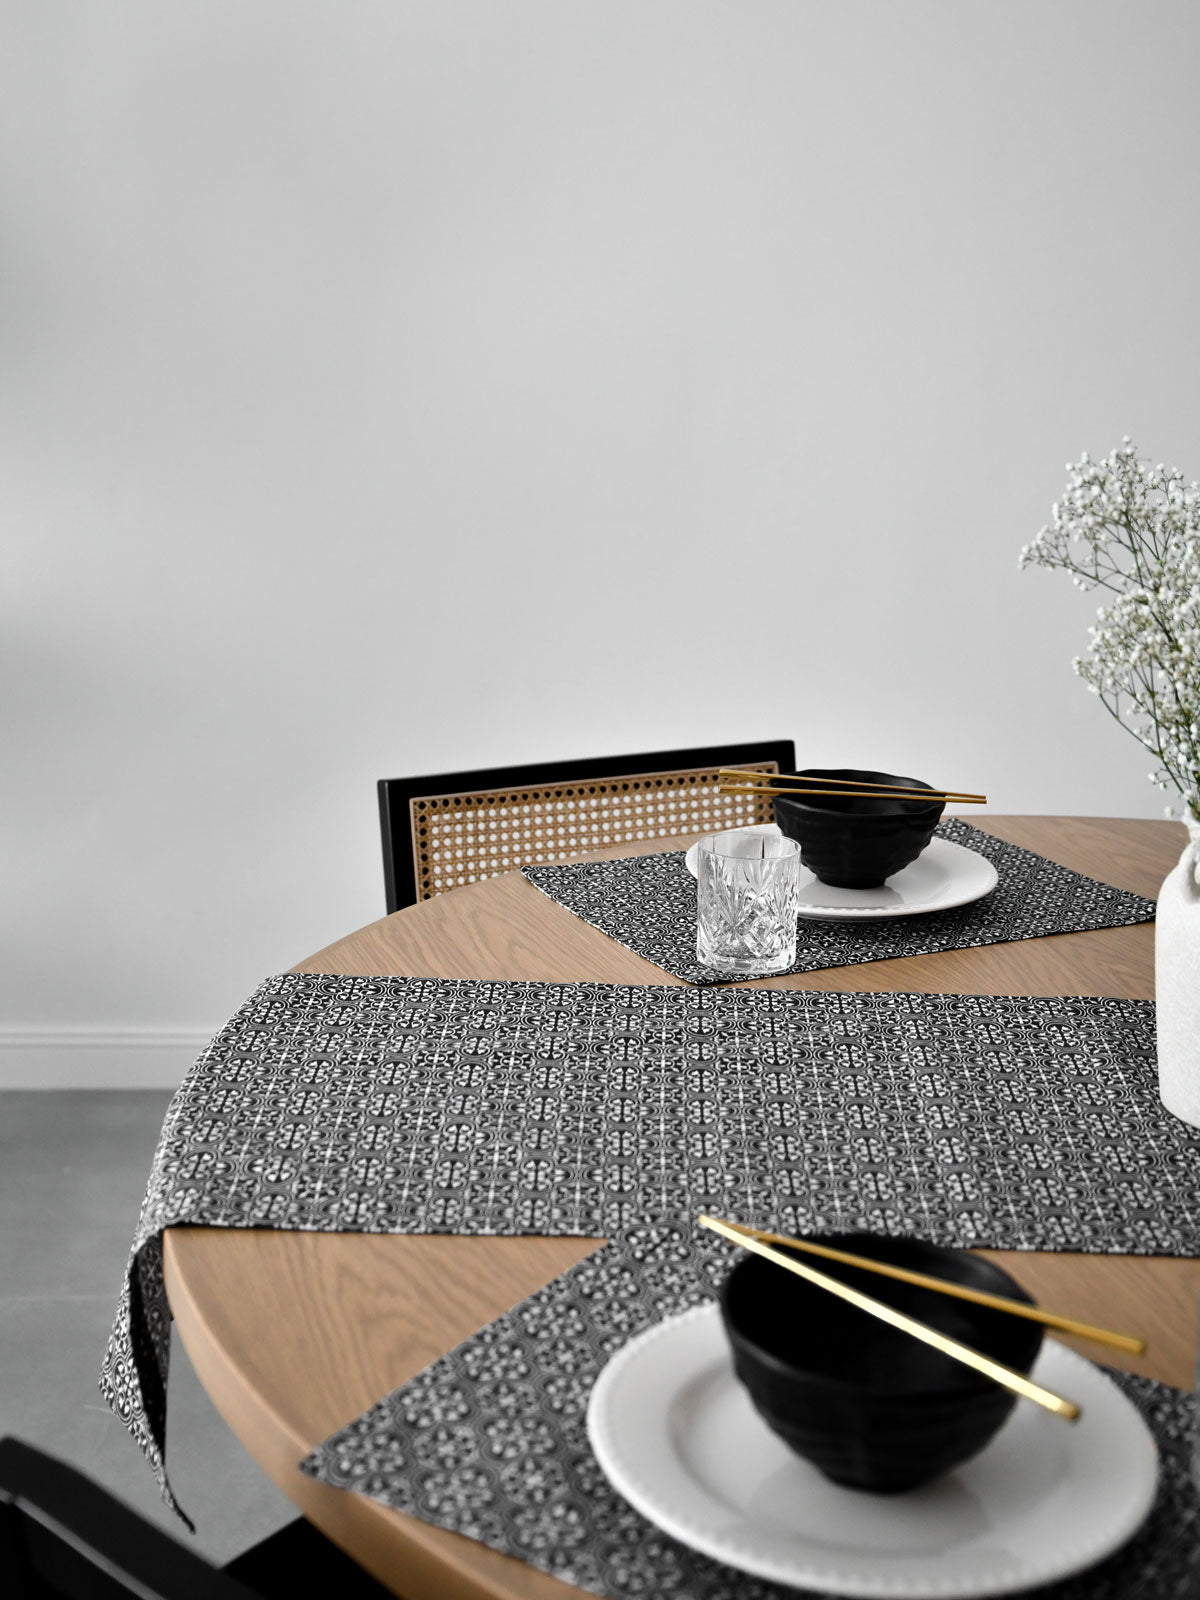 Iswed Table Runner